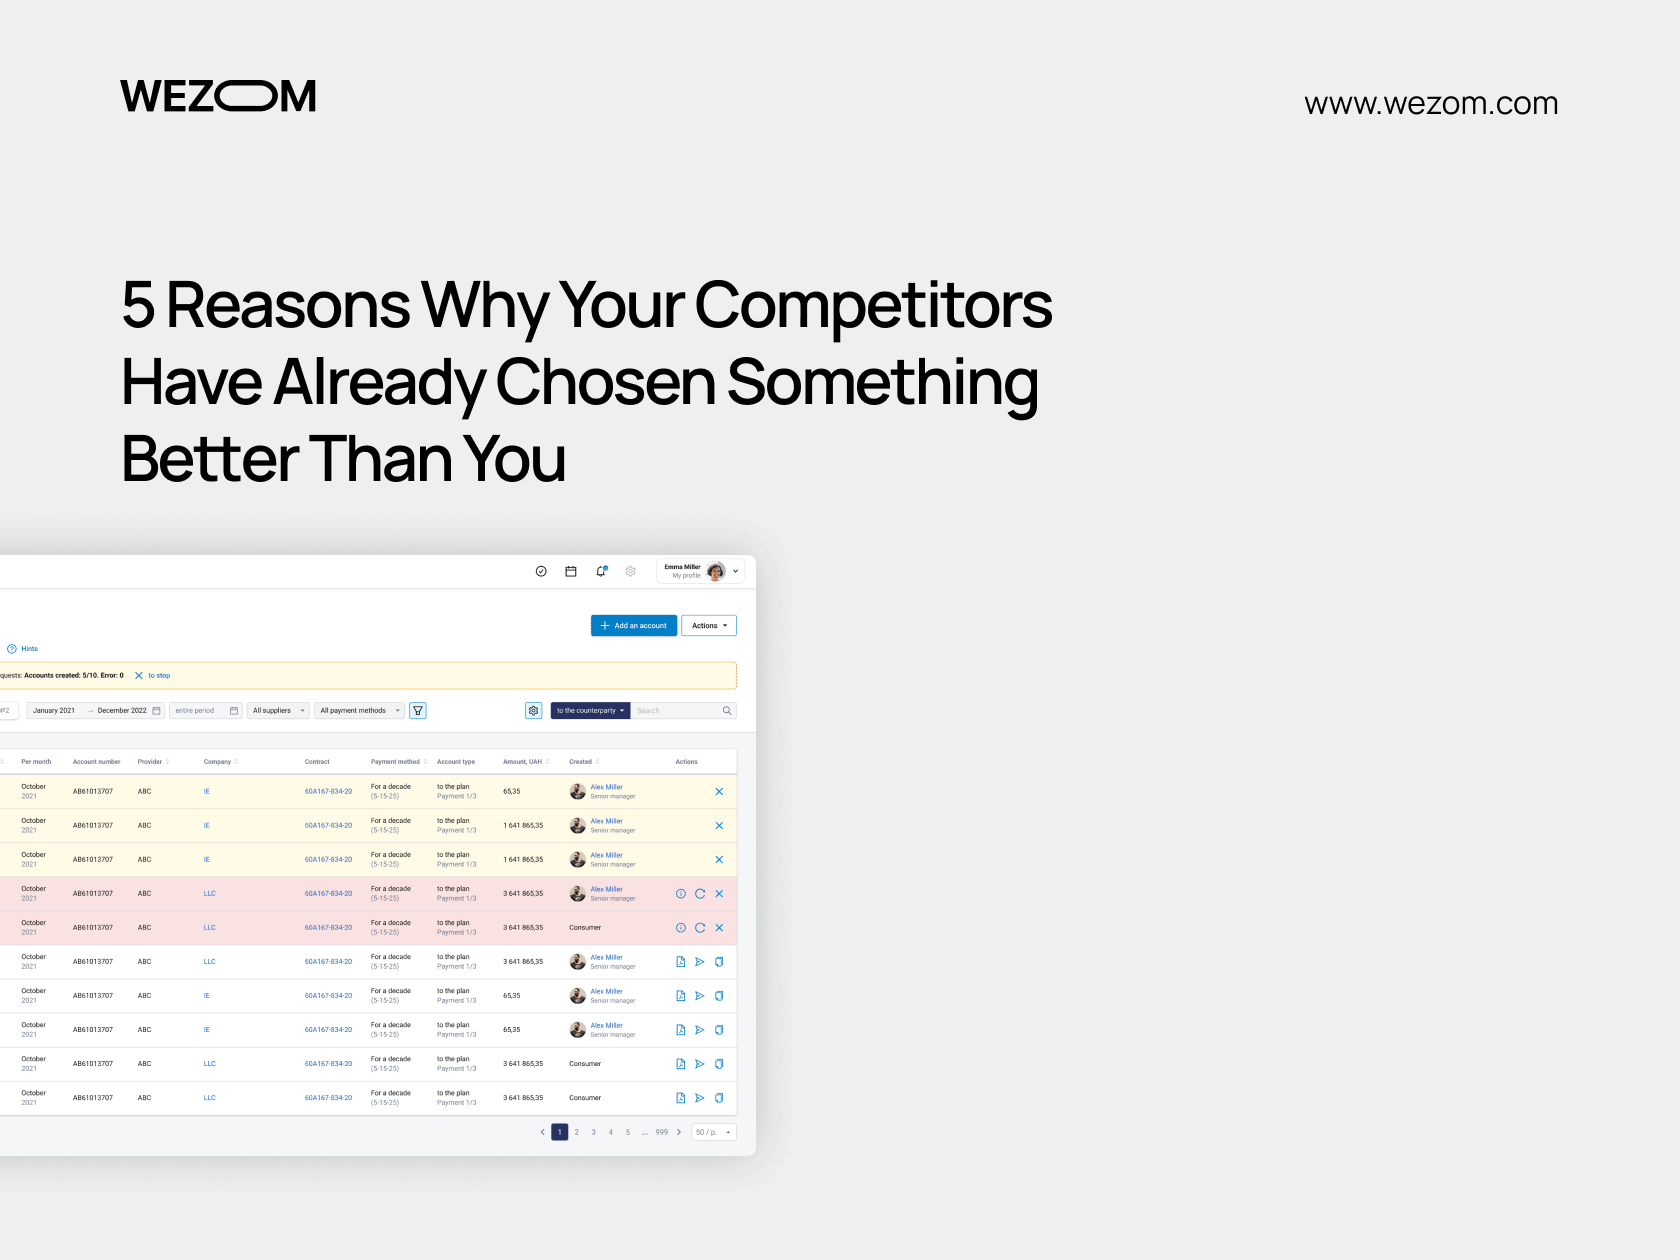 Reasons Why Your Competitors Have Already Chosen Something Better Than You